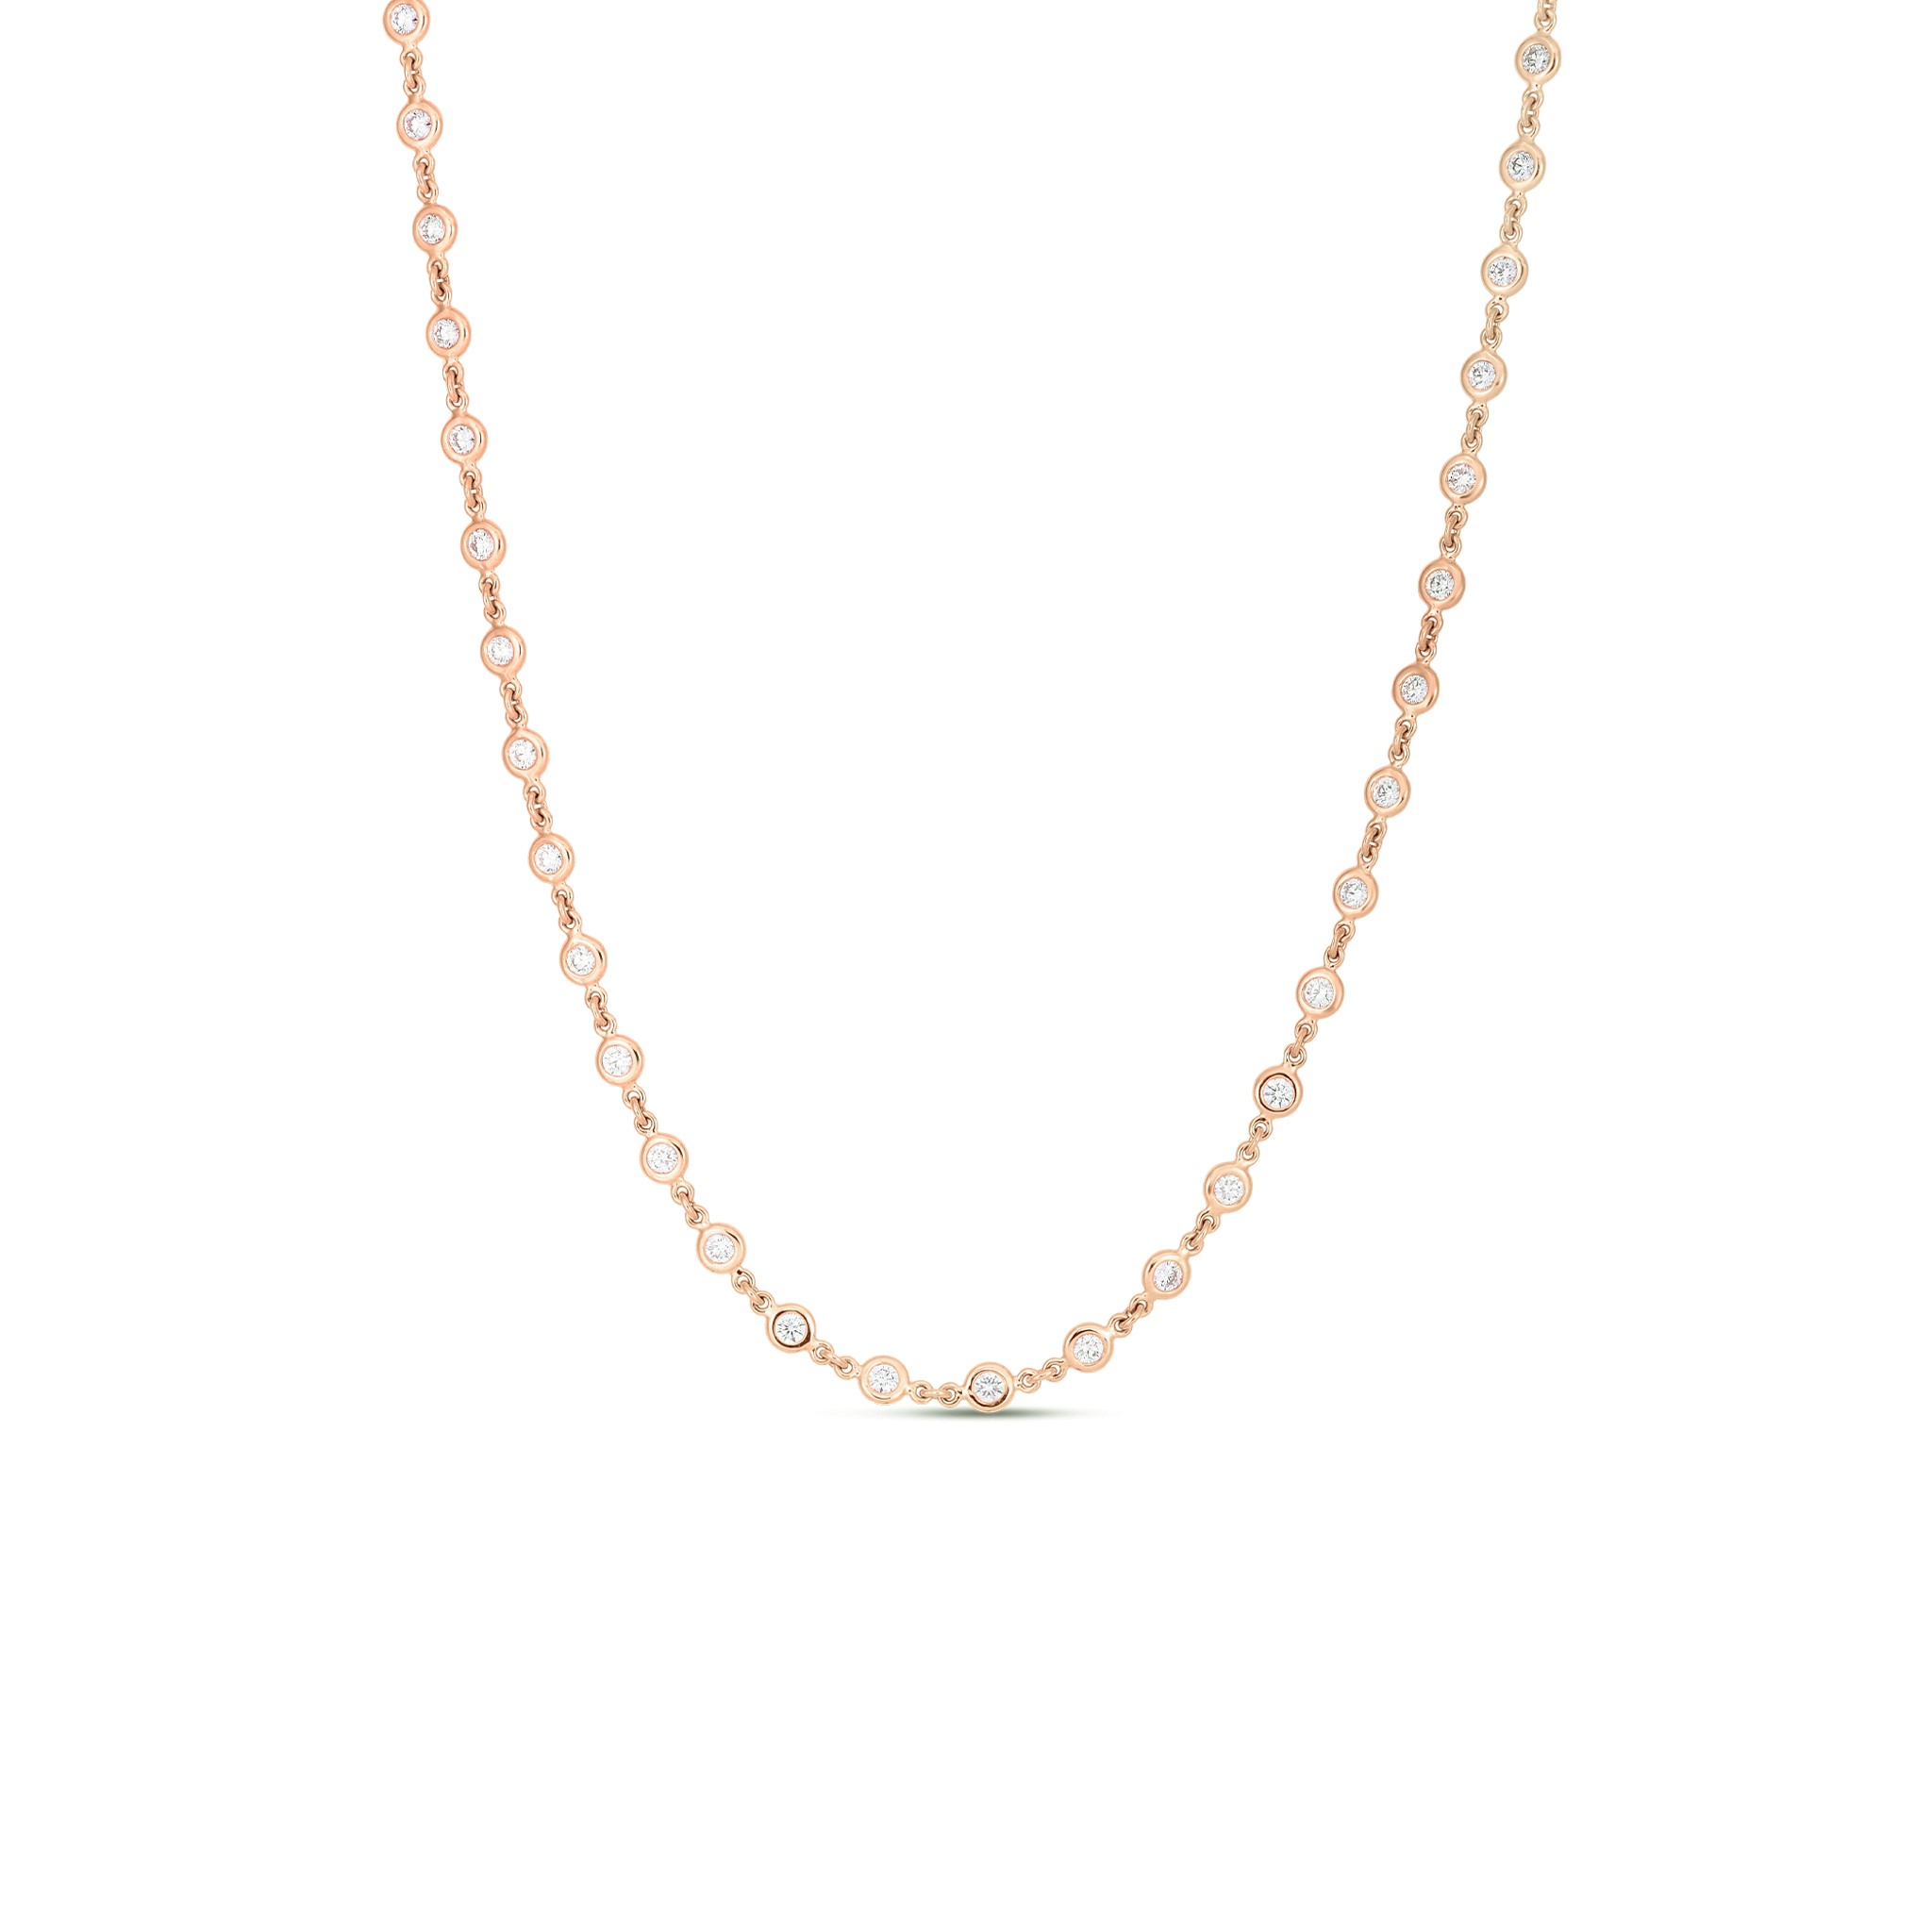 18K GOLD DIAMONDS BY THE INCH 15 STATION NECKLACE - Roberto Coin - North  America